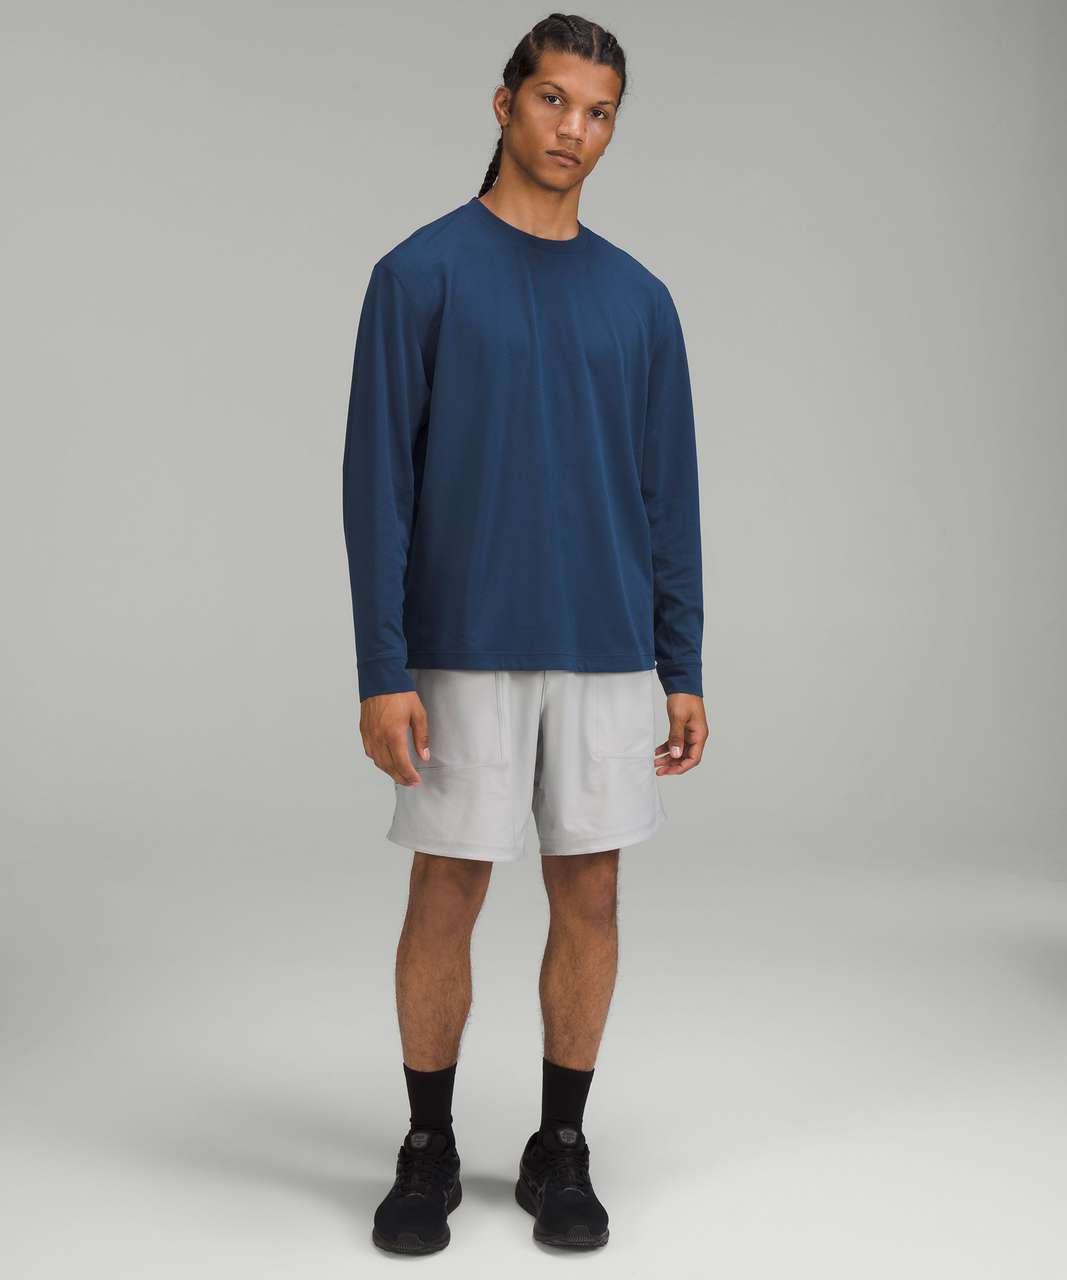 Lululemon Relaxed-Fit Training Long Sleeve Shirt - Mineral Blue